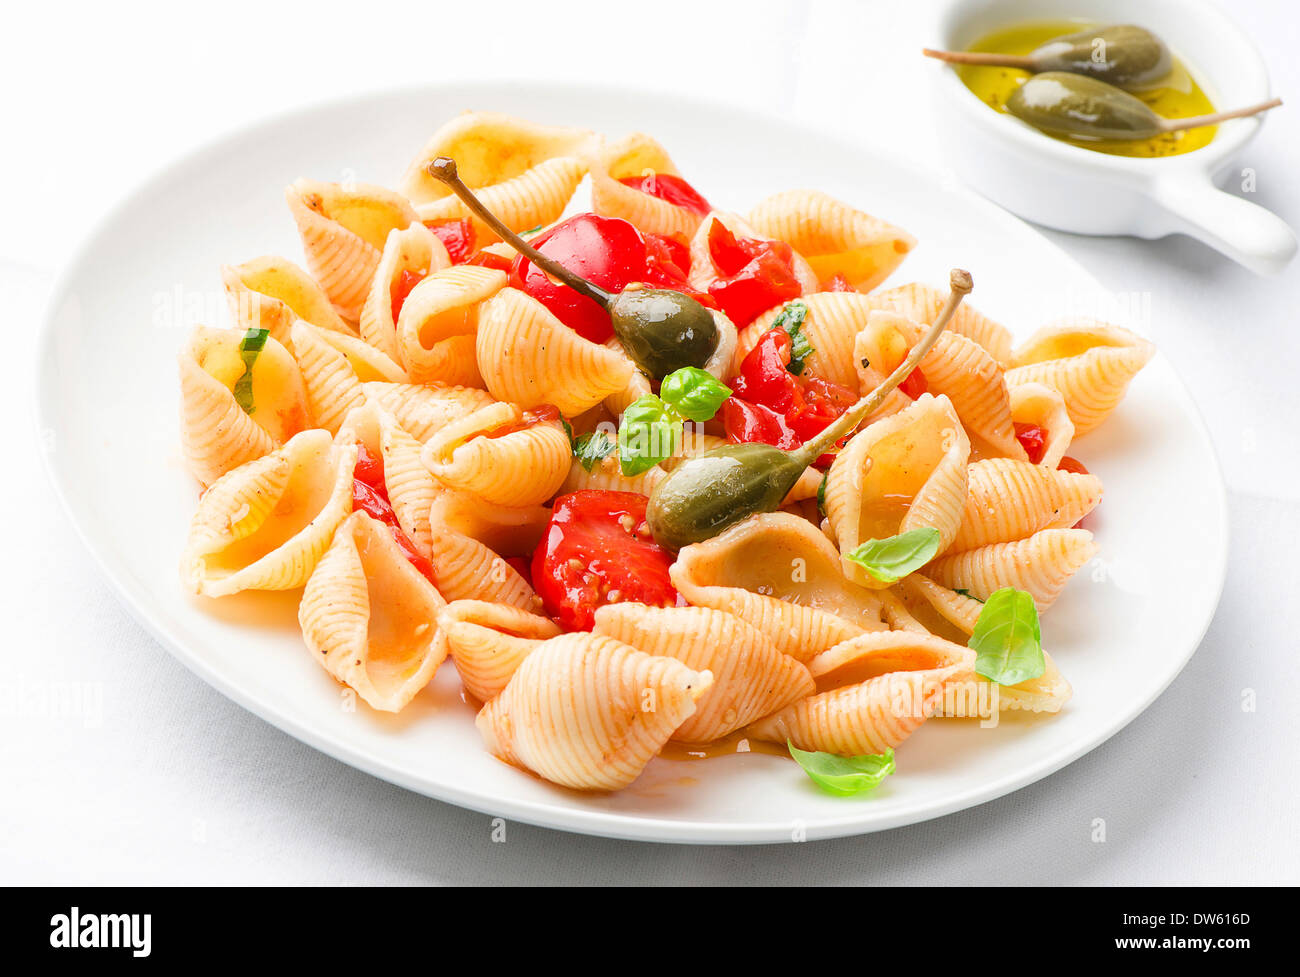 Pasta with vegetables Stock Photo